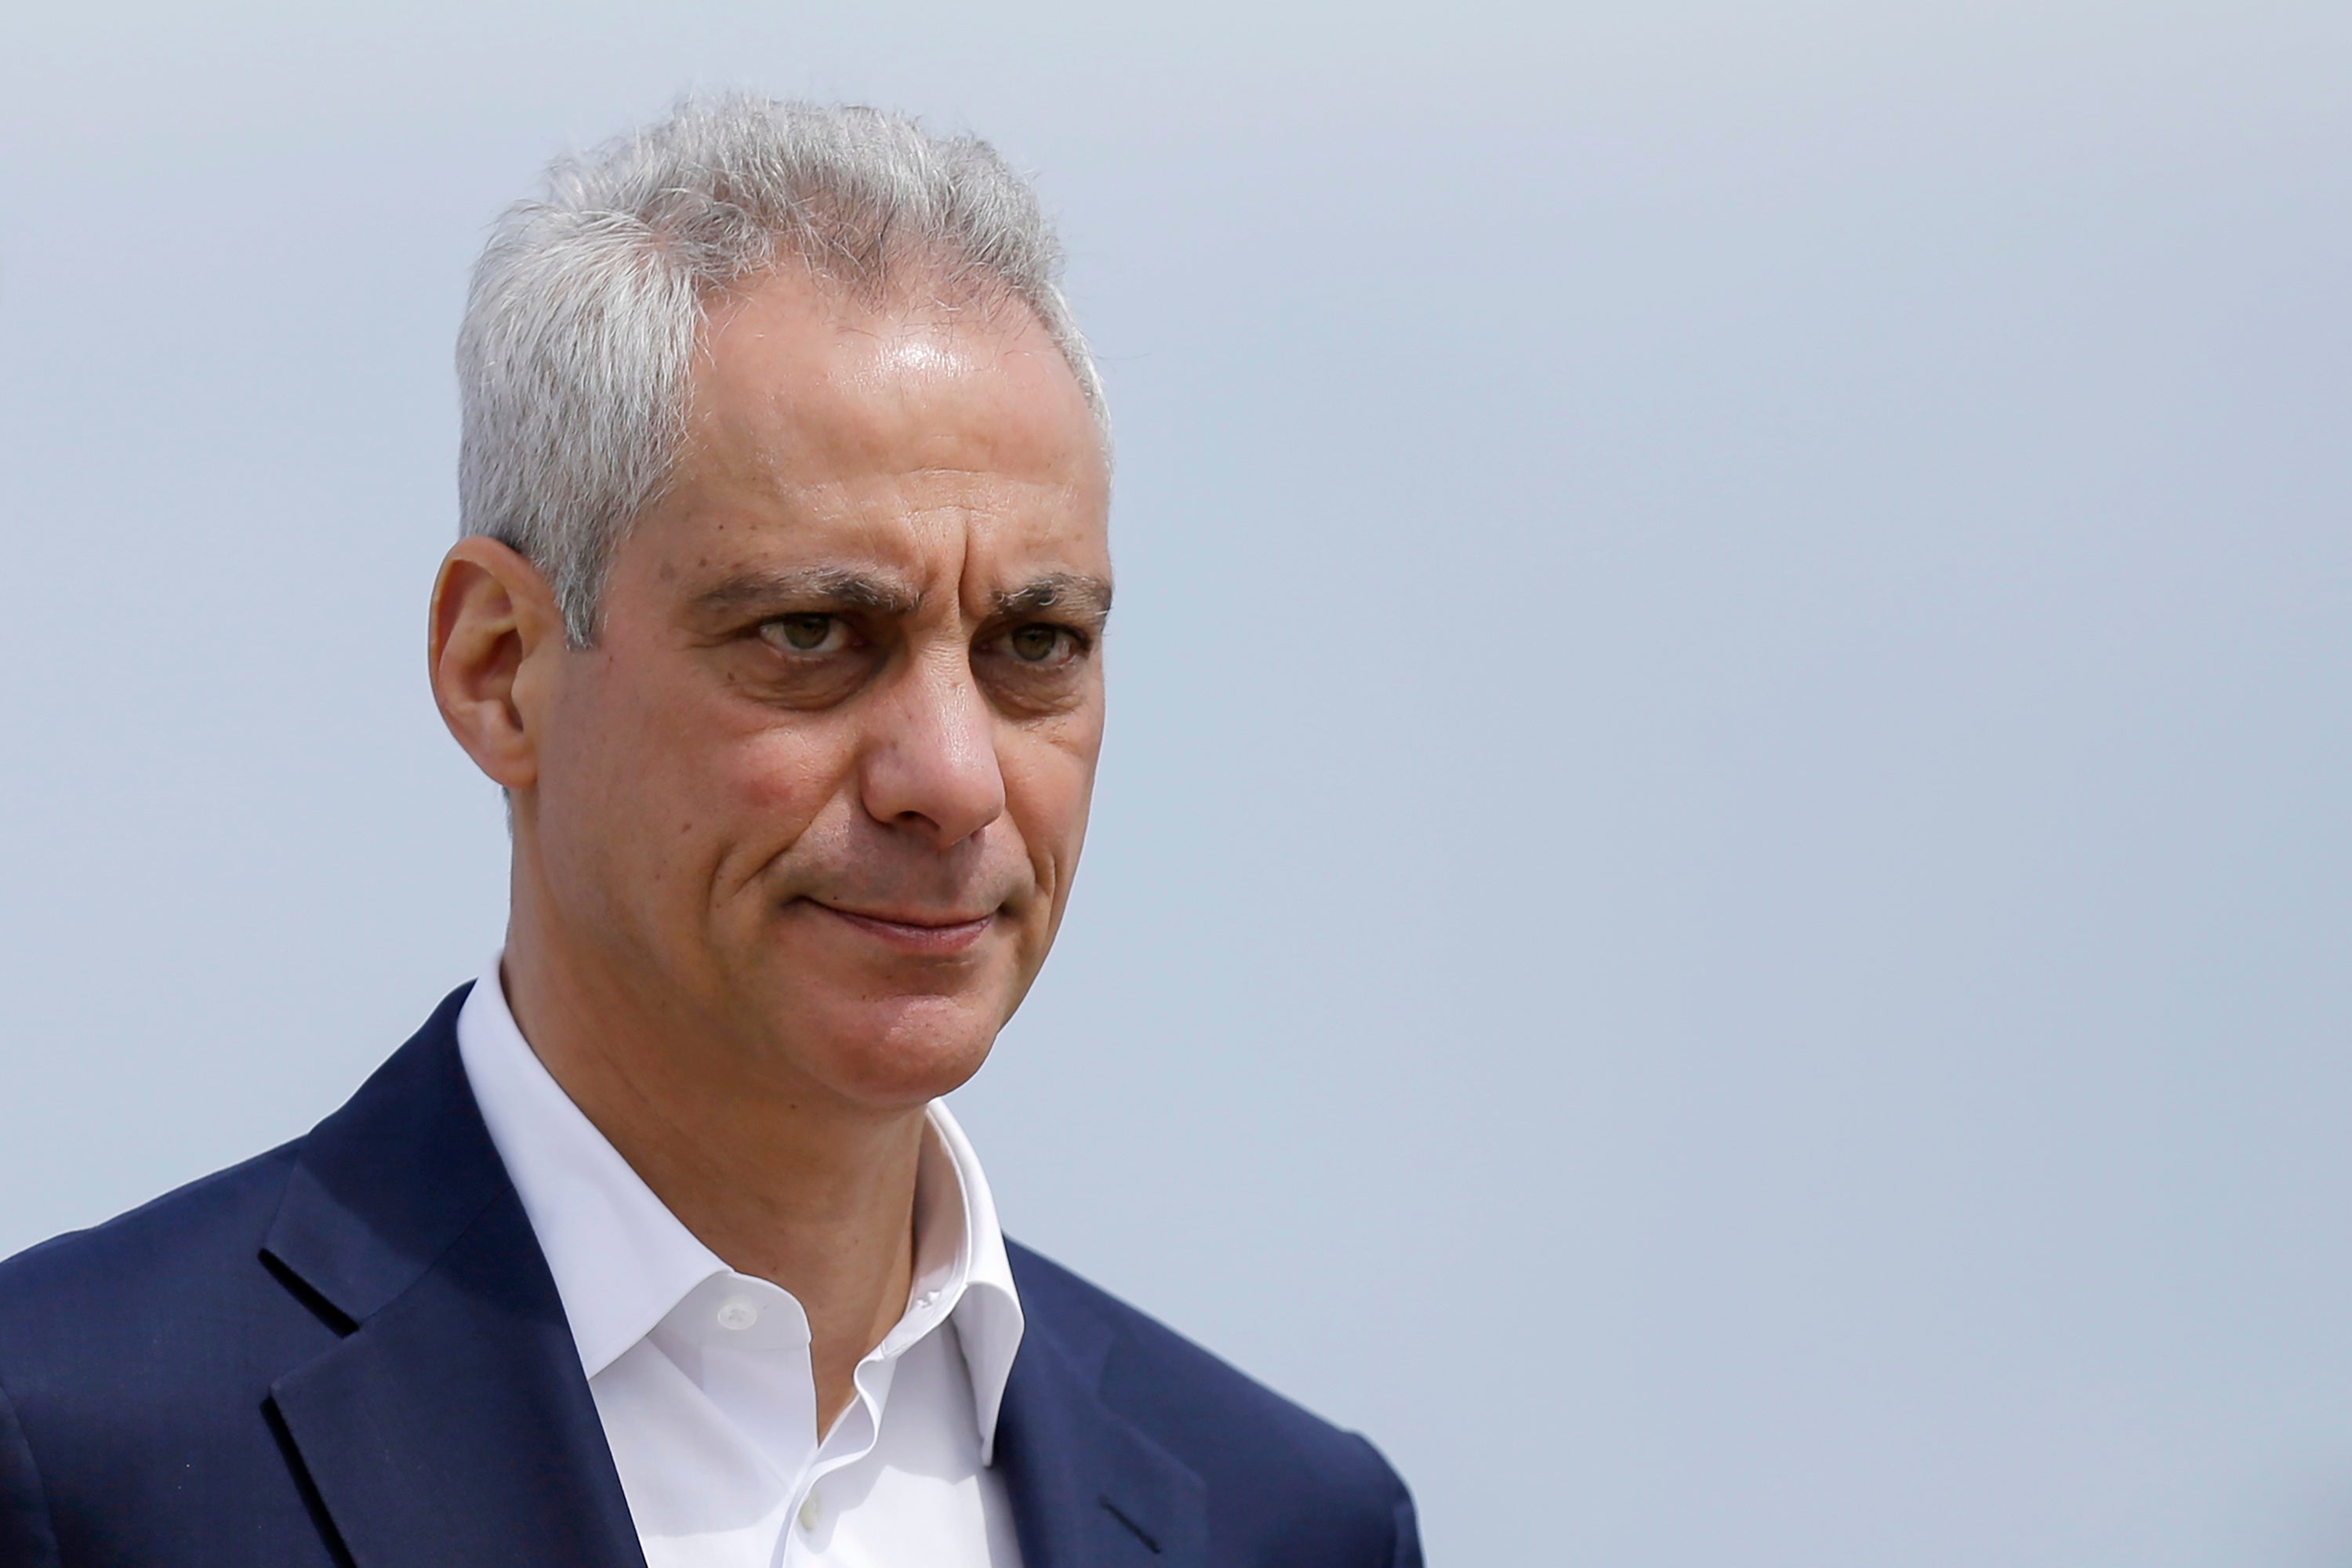 Former Chicago mayor Rahm Emanuel, nominated to serve as US ambassador to Japan under Joe Biden, has been accused of staging a “cover up” and misleading the public in the police killing of Laquan McDonald in 2014.